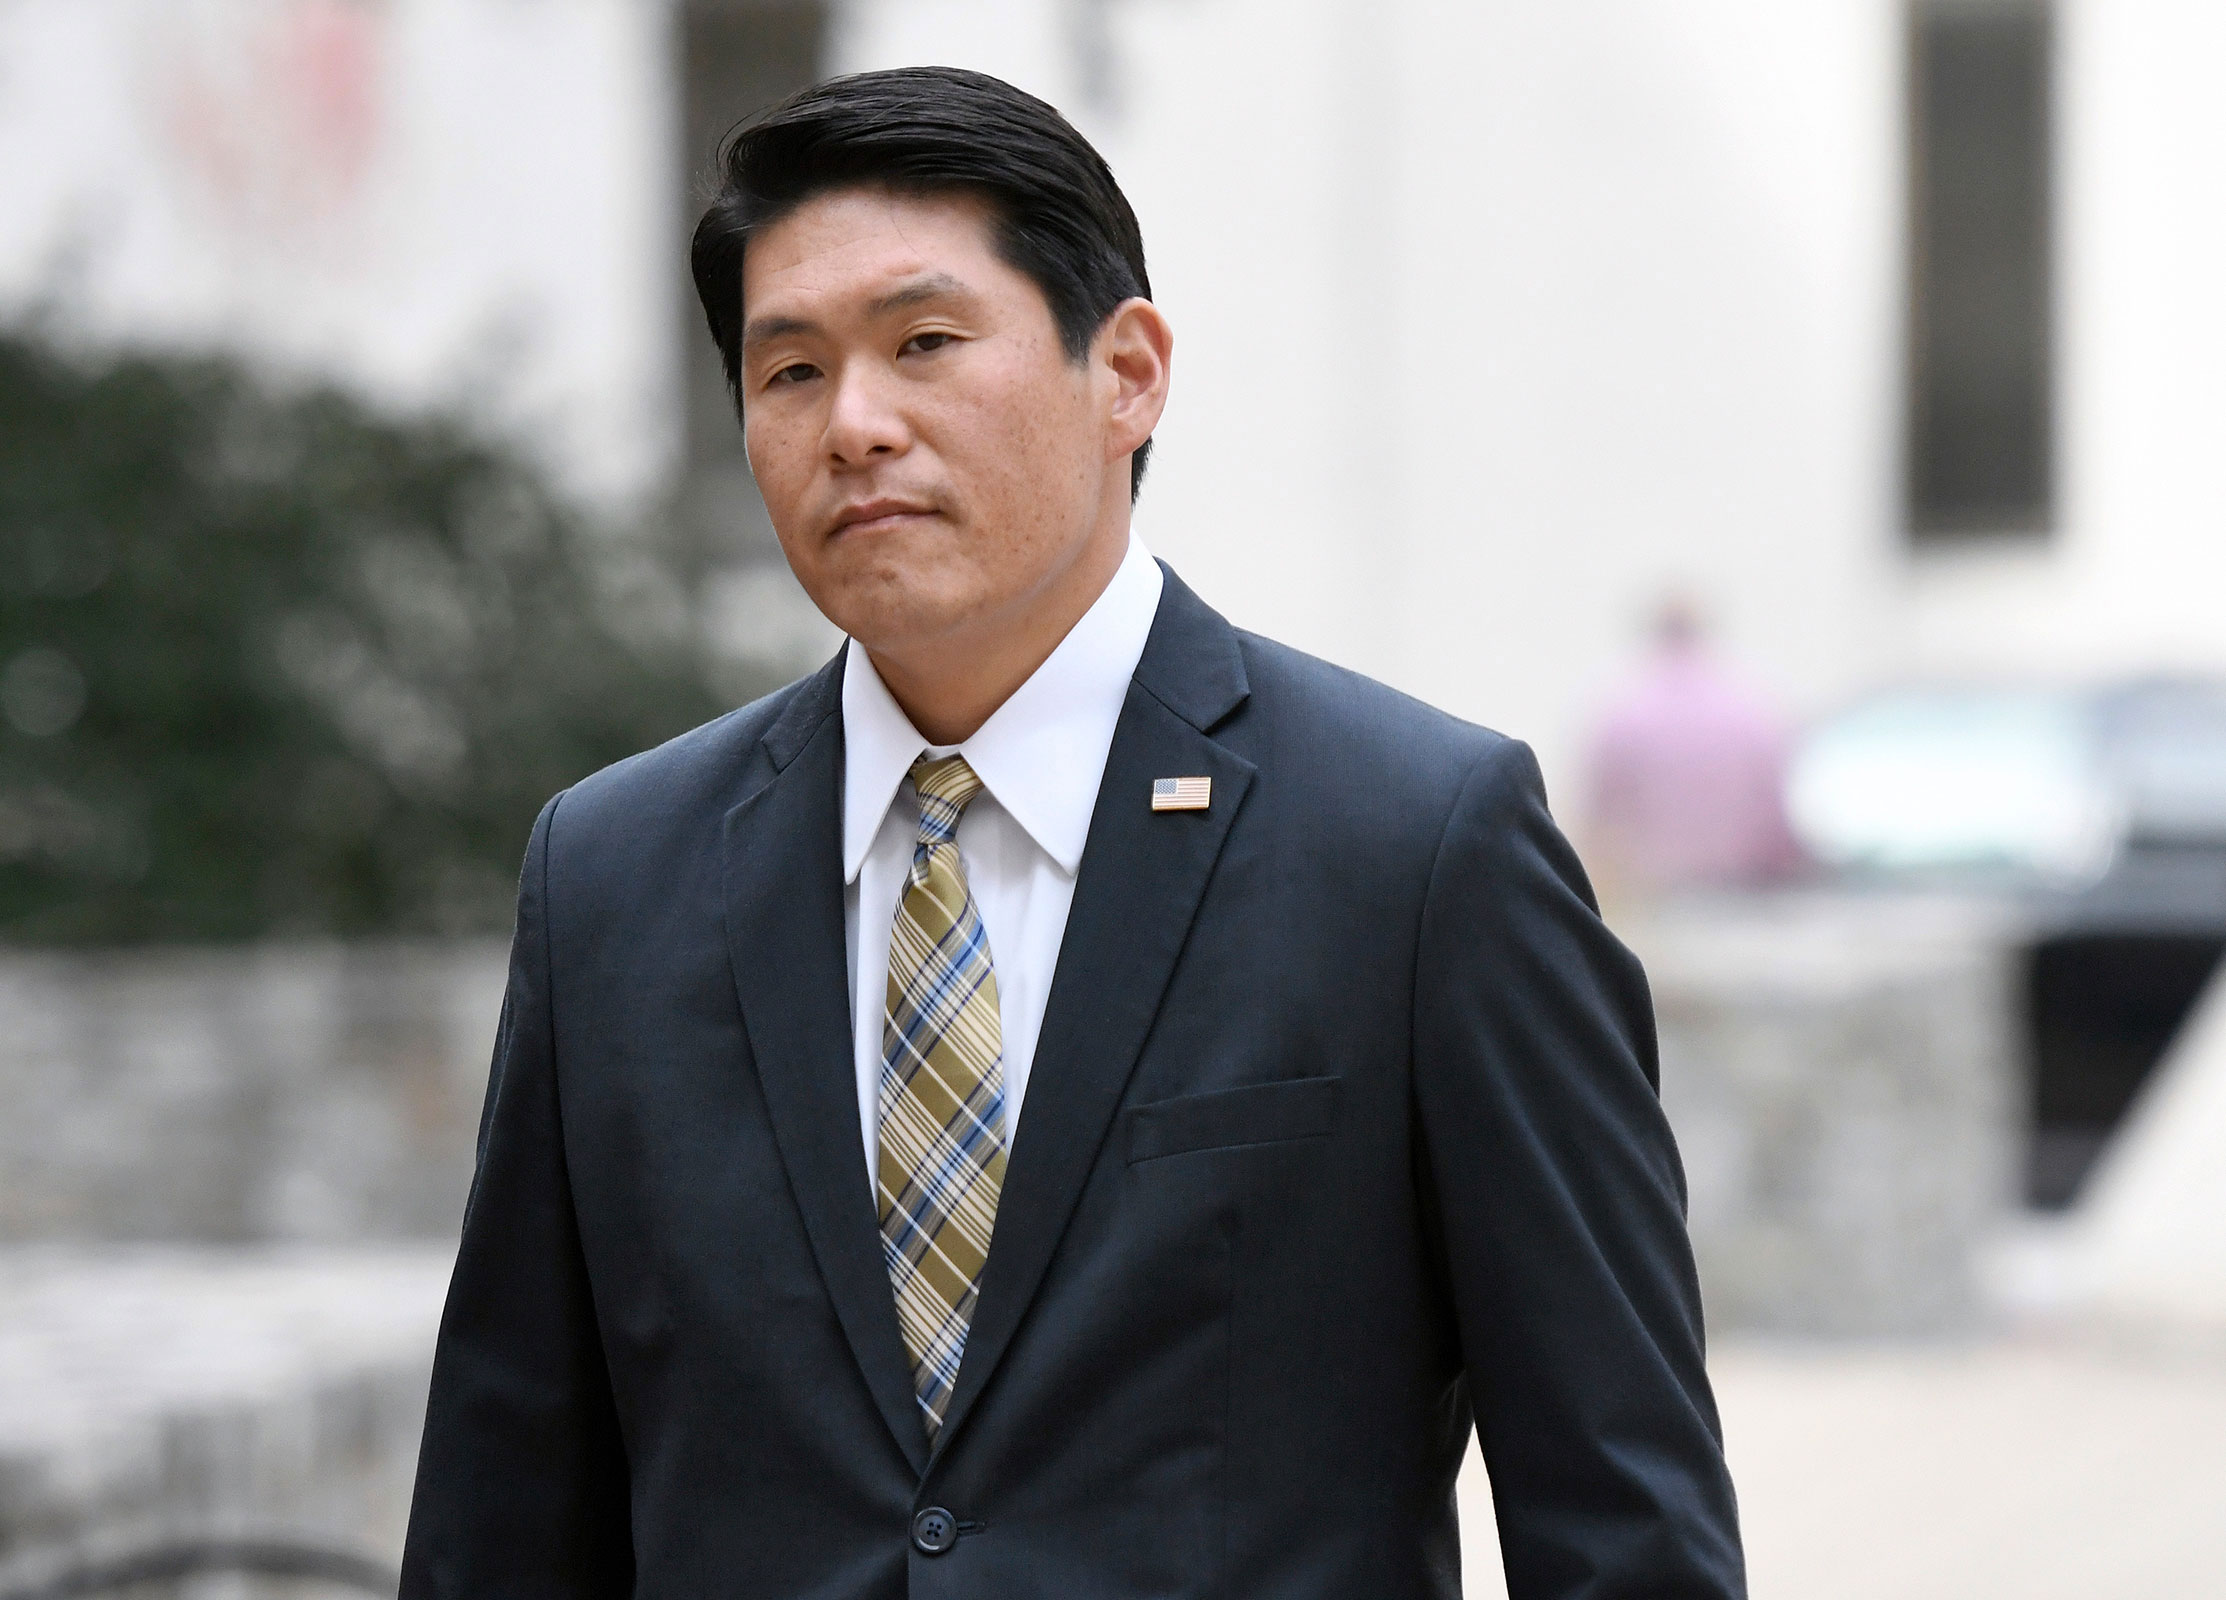 Attorney Robert Hur arrives at US District Court in Baltimore in 2019.